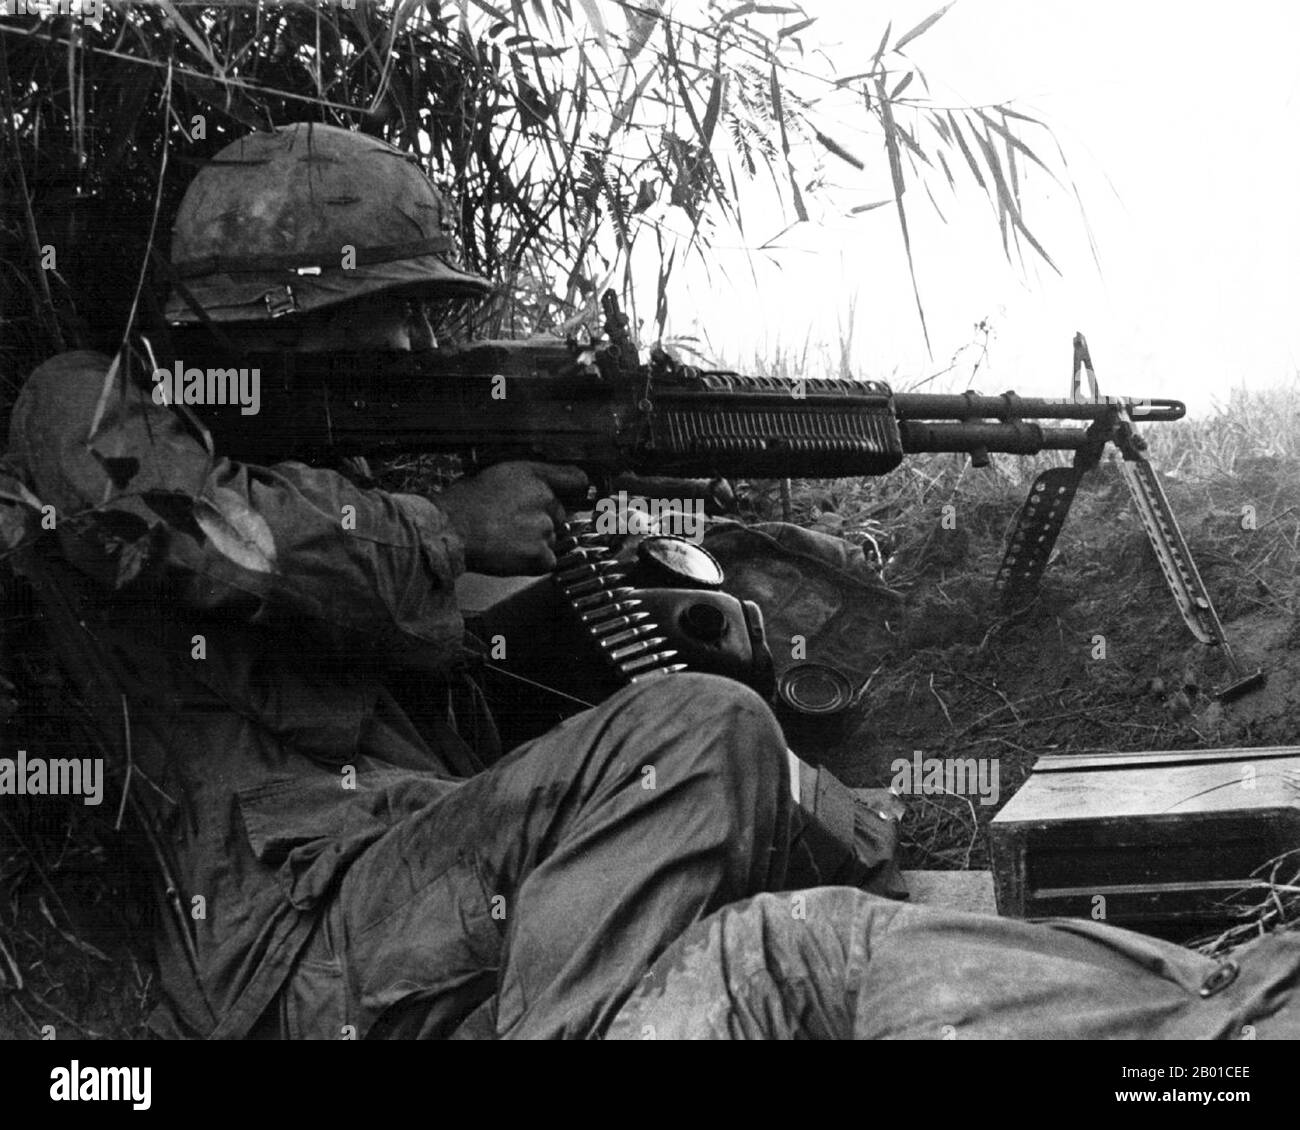 Vietnam: US Army Sergeant Gerald Laird of the 101st Airborne Division firing a machine gun during an engagement in South Vietnam, c. 1966.  The Second Indochina War, known in America as the Vietnam War, was a Cold War era military conflict that occurred in Vietnam, Laos, and Cambodia from 1 November 1955 to the fall of Saigon on 30 April 1975. This war followed the First Indochina War and was fought between North Vietnam, supported by its communist allies, and the government of South Vietnam, supported by the U.S. and other anti-communist nations. Stock Photo